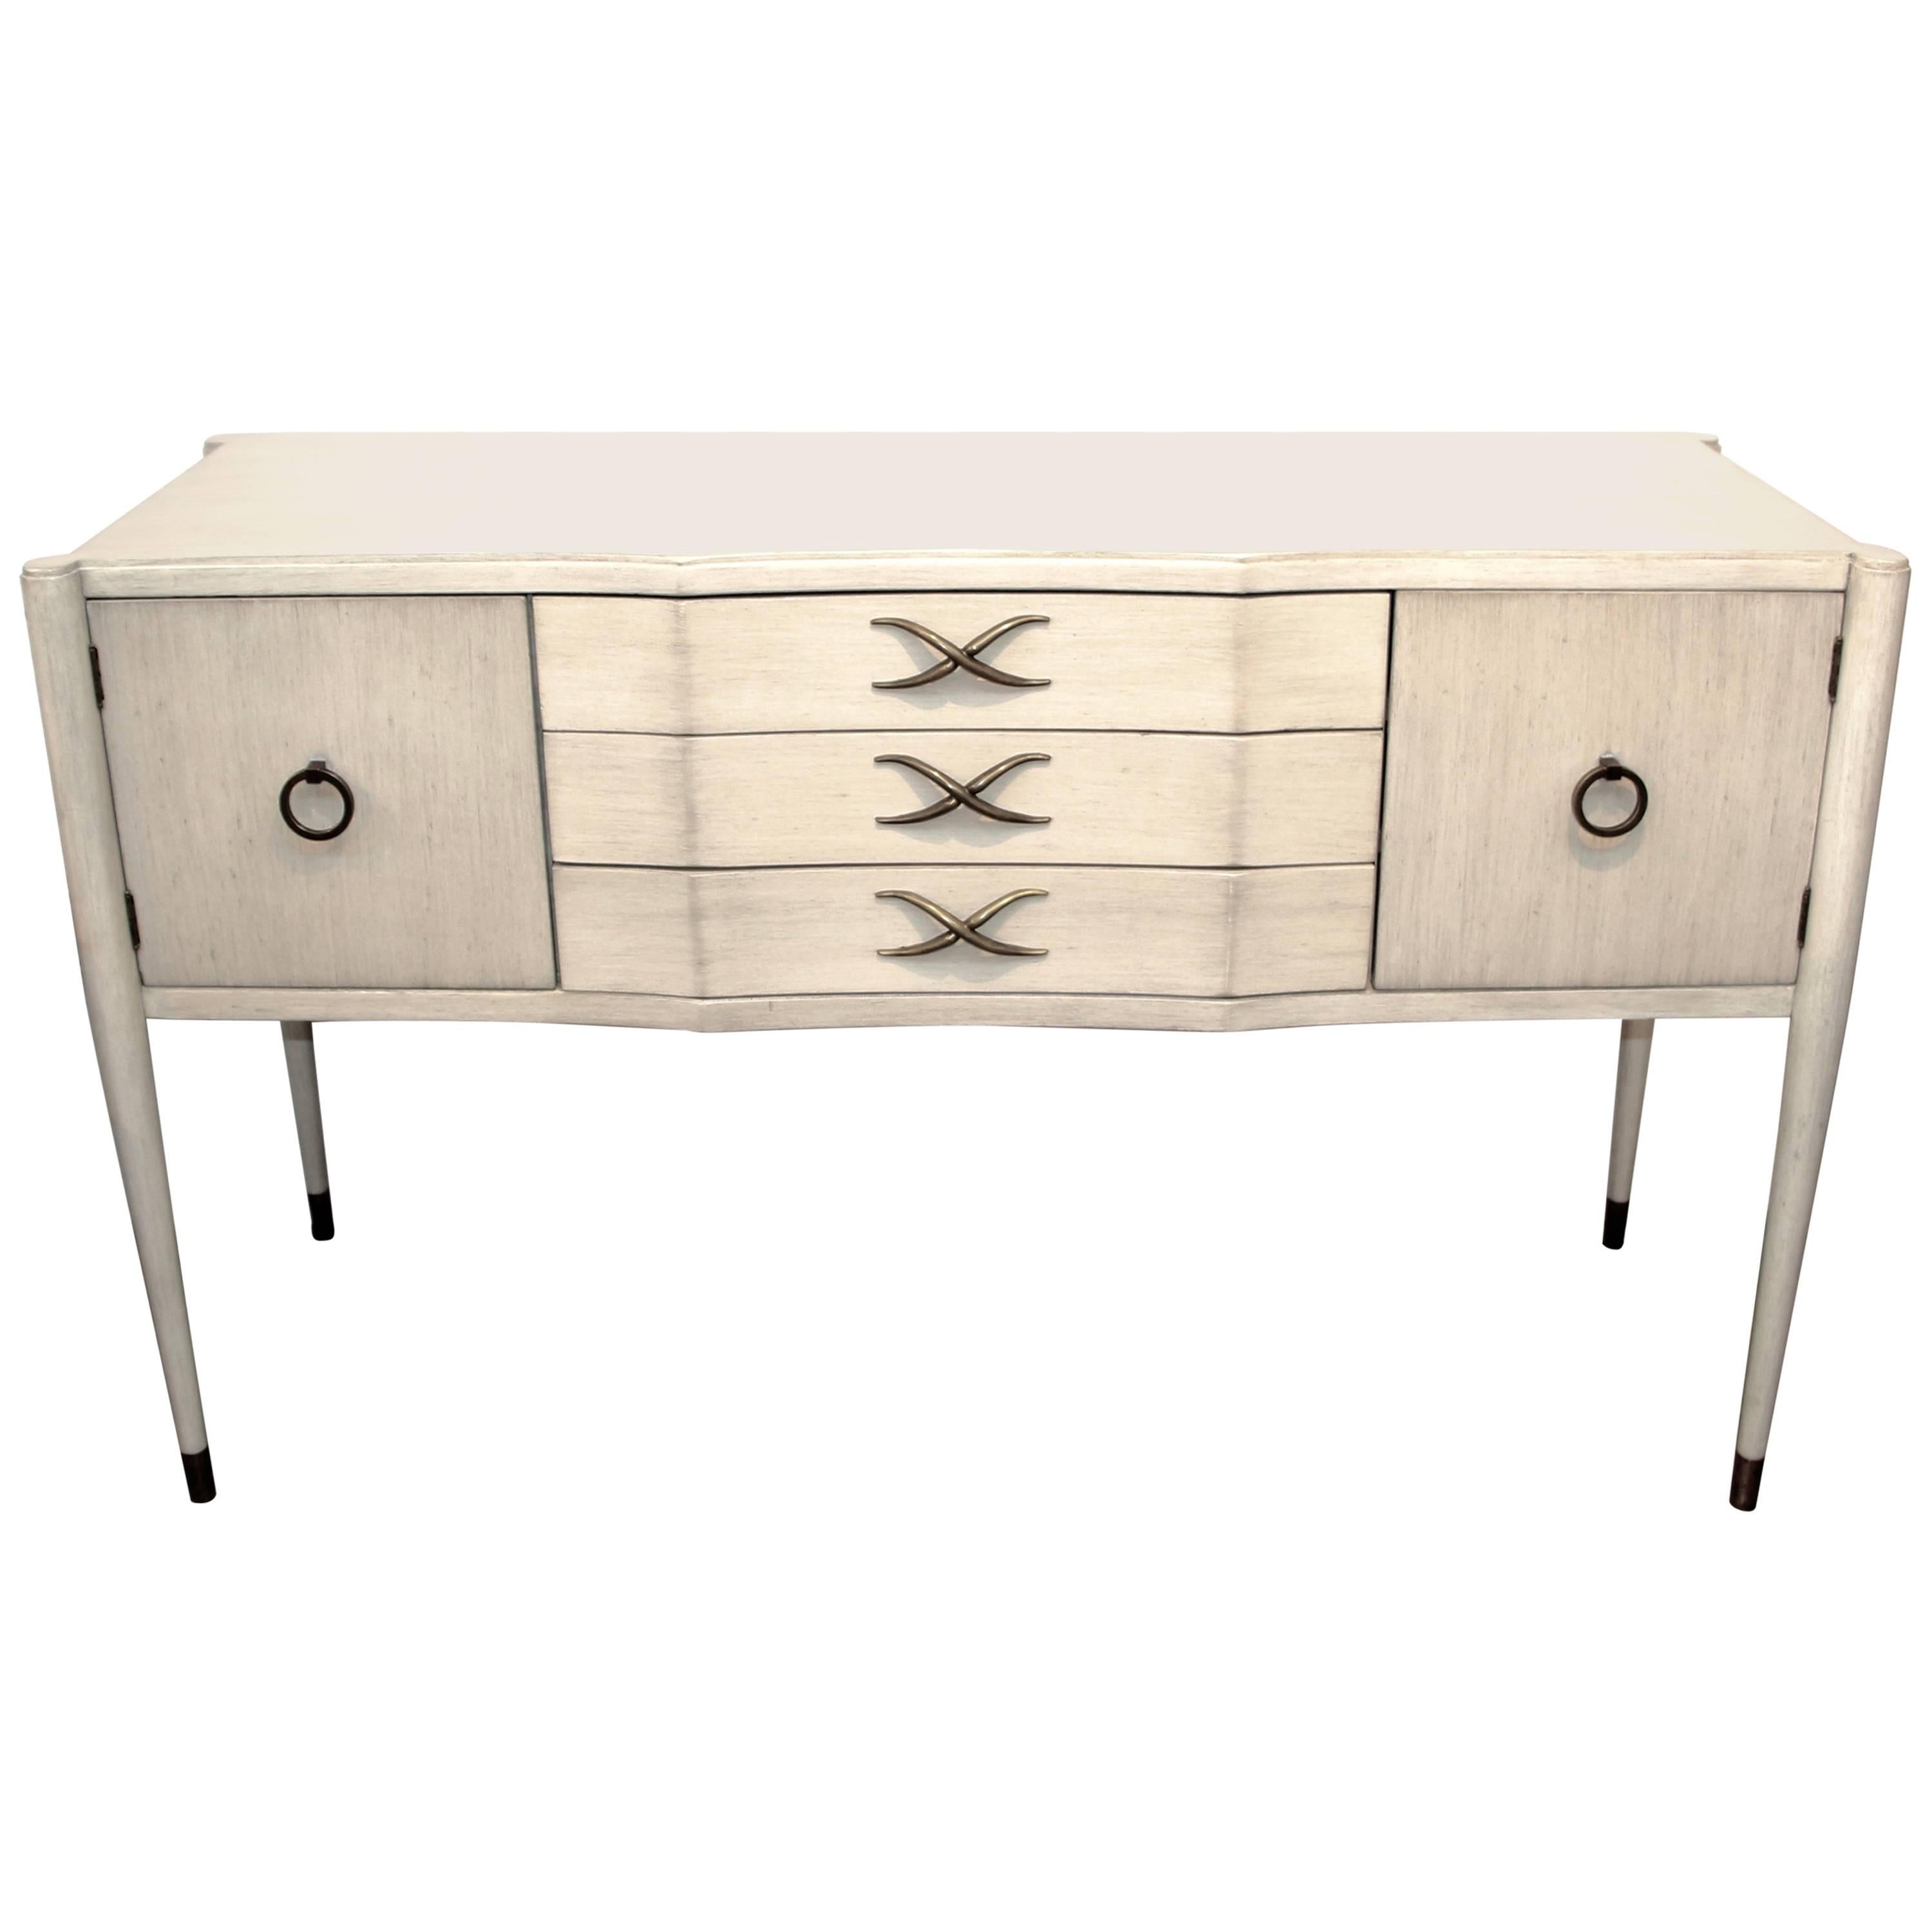 Paul Frankl for Brown Saltman Credenza in a White Wash Finish